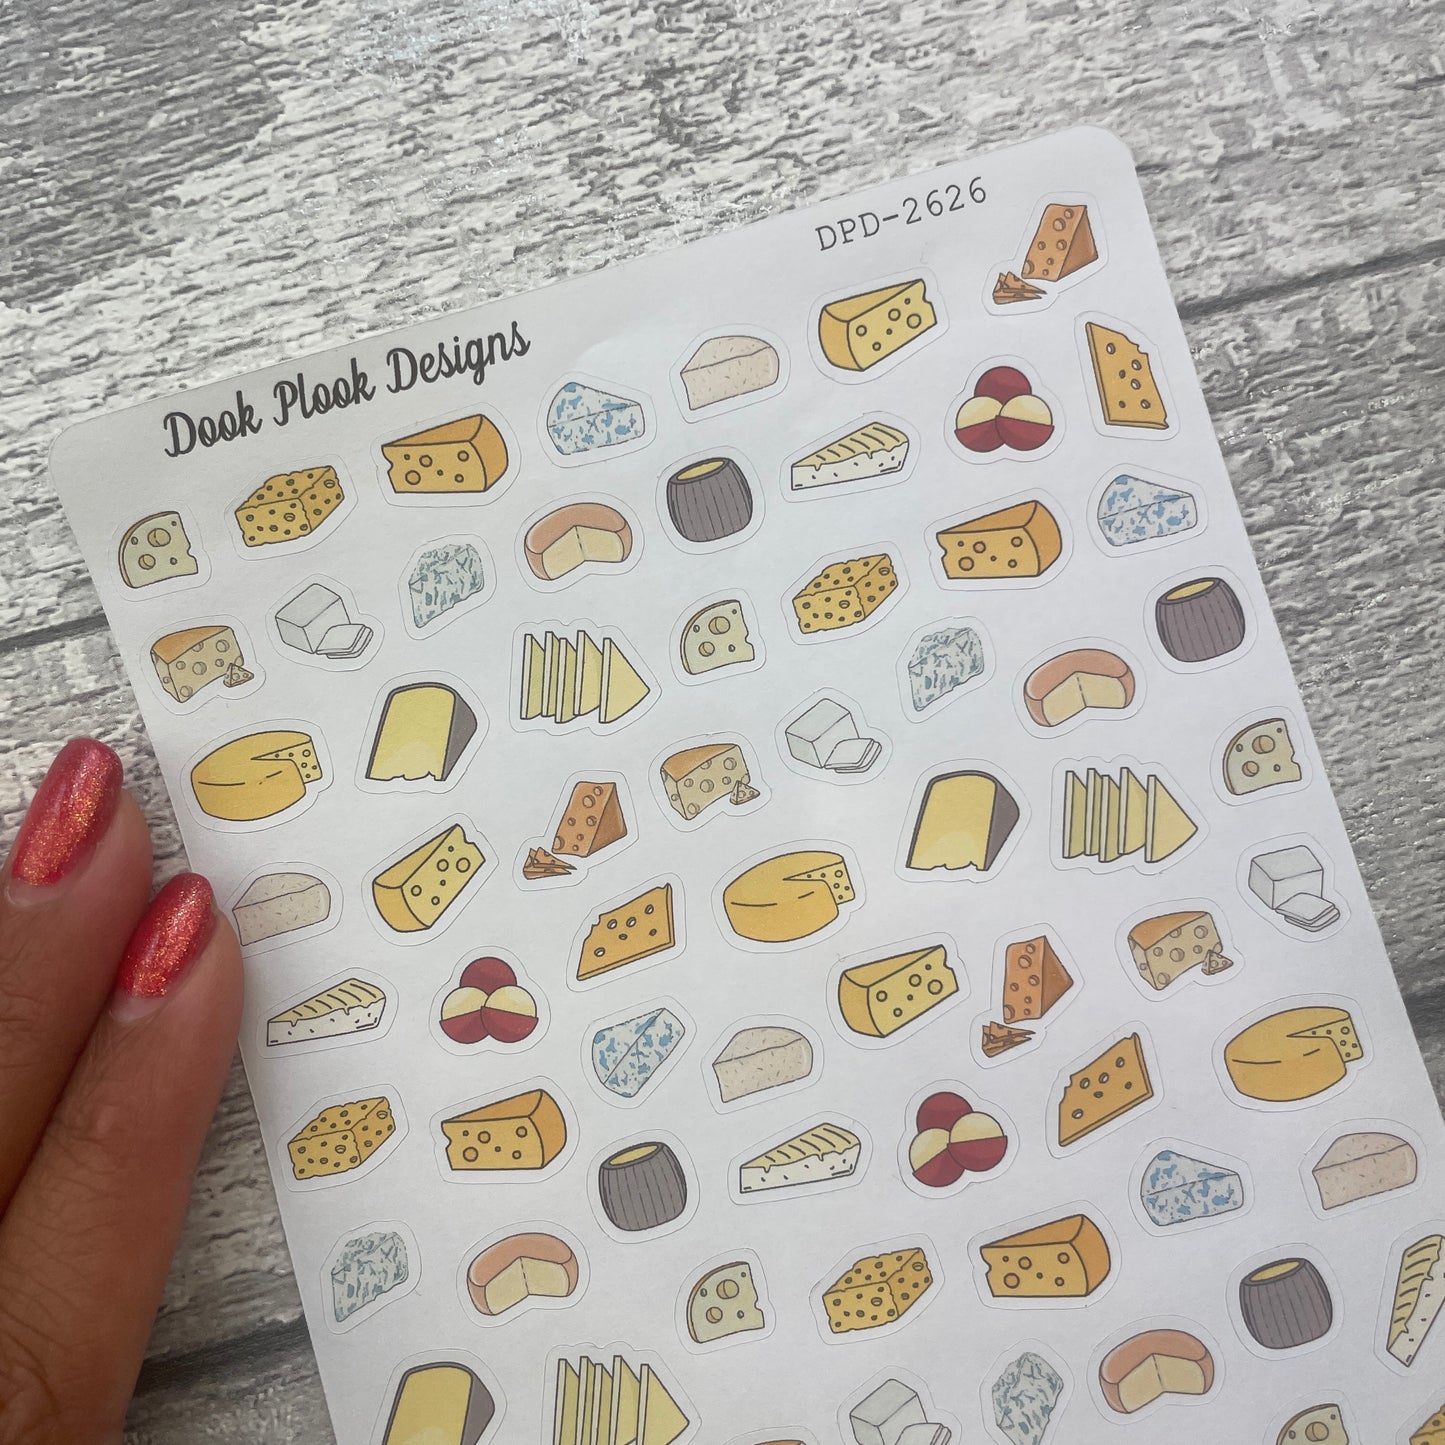 Small Cheese stickers (DPD2626)